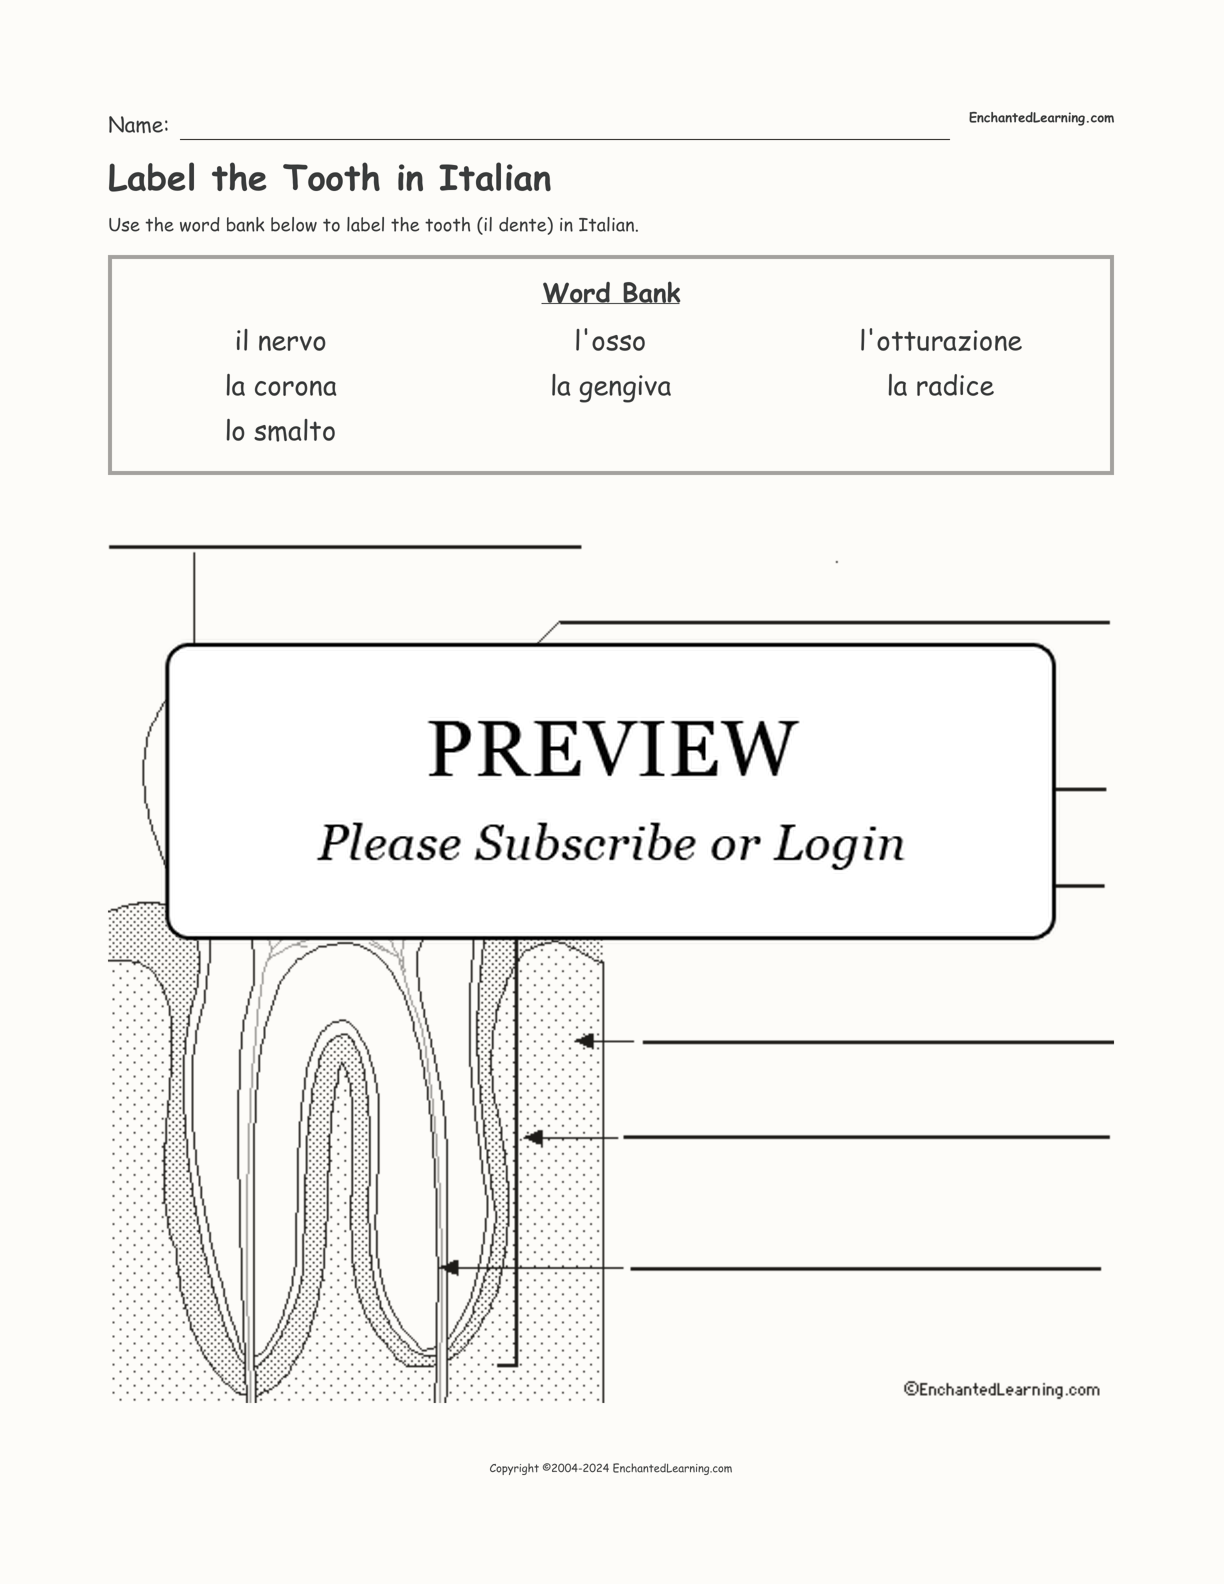 Label the Tooth in Italian interactive worksheet page 1